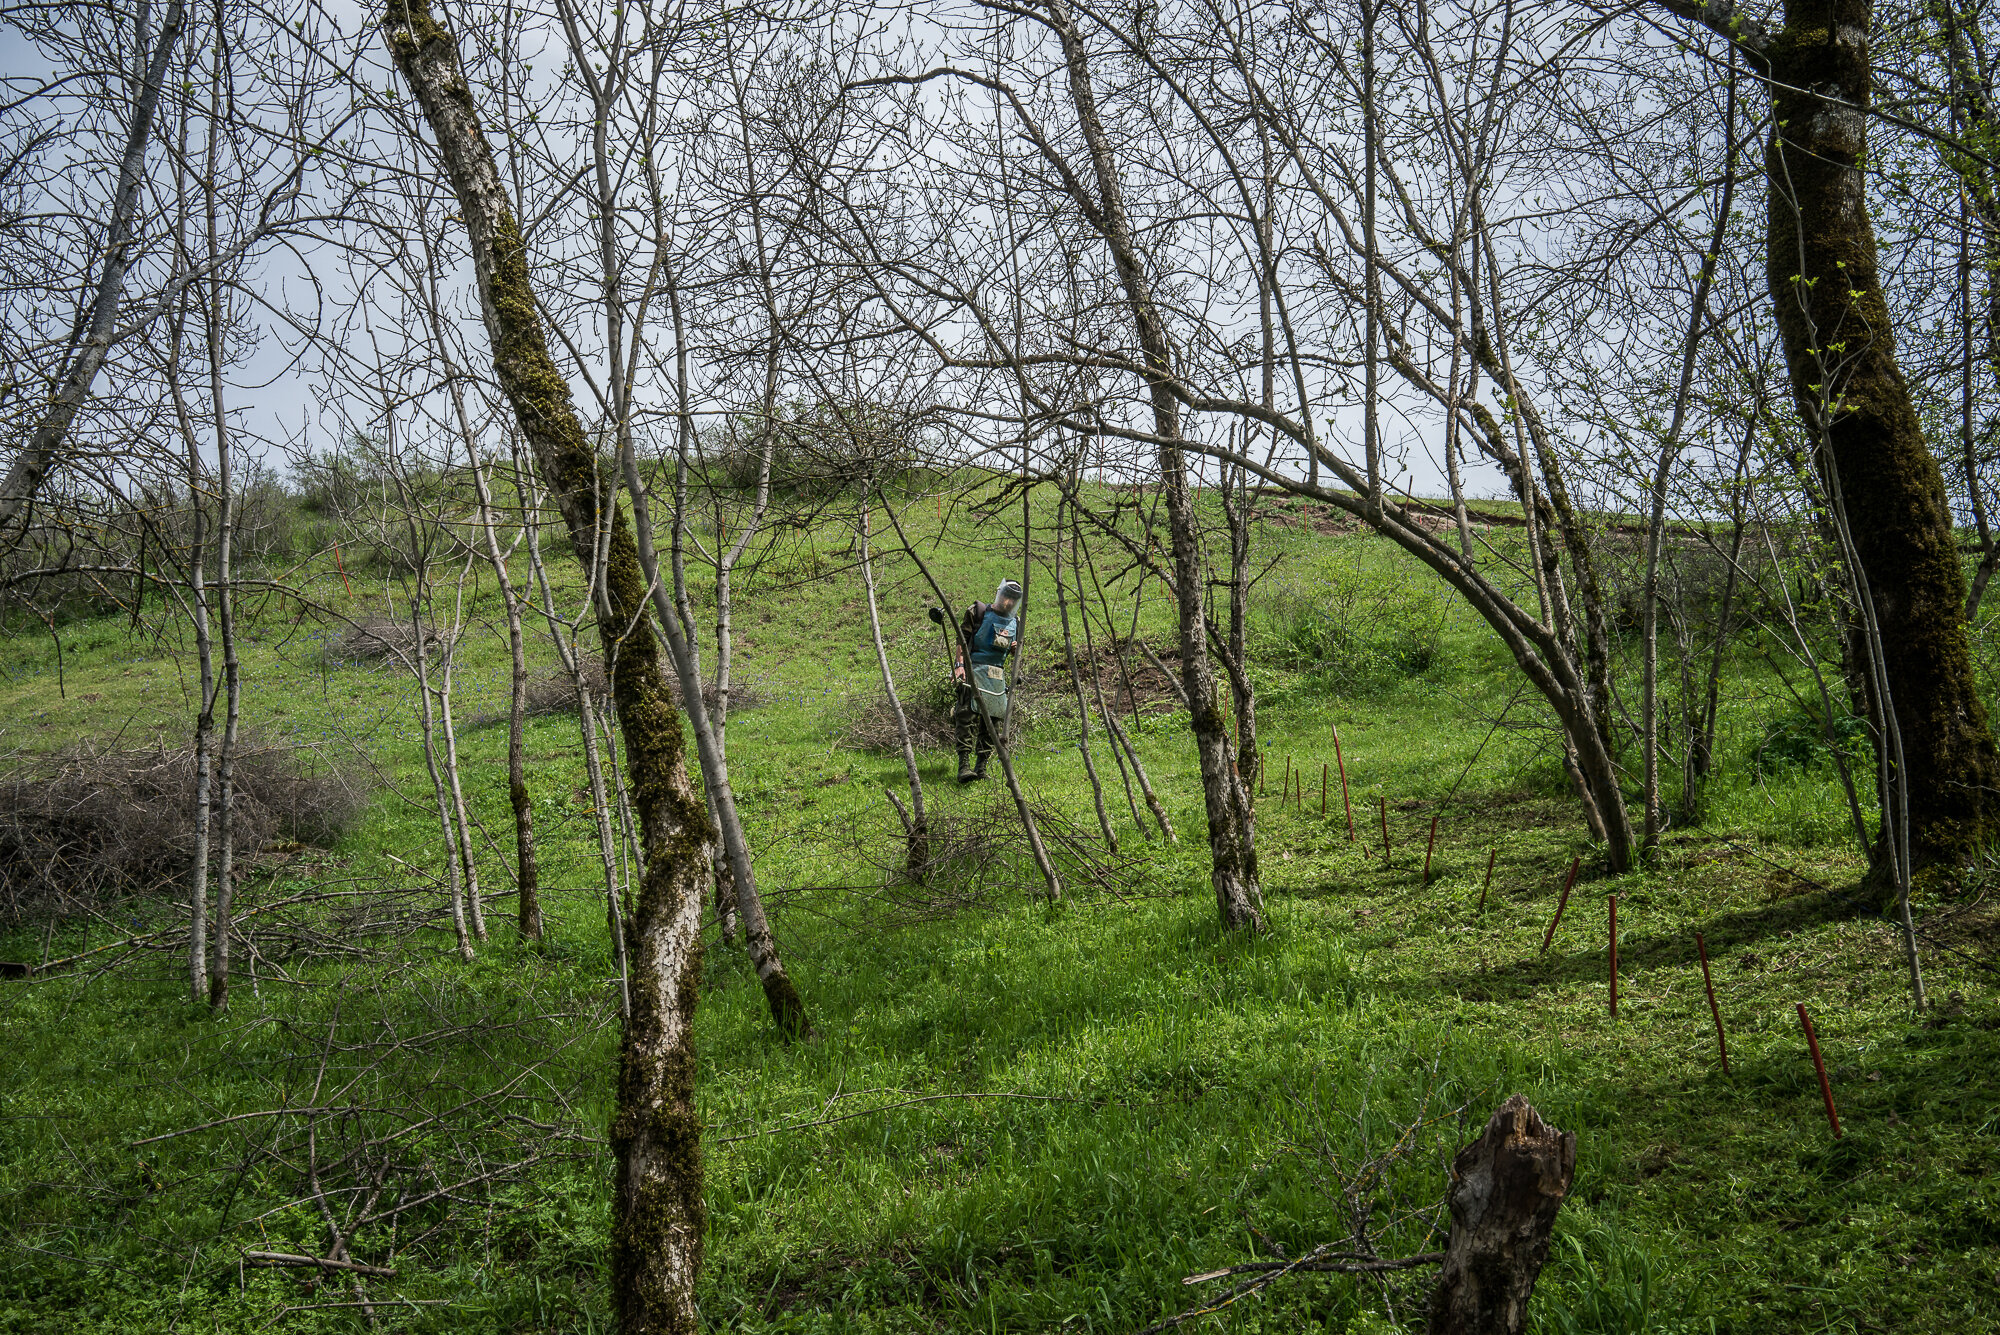  Armen Ussoyan, a deminer with the charity HALO Trust, works to clear a minefield. Hagob Kamari, Nagorno-Karabakh. 2015. 